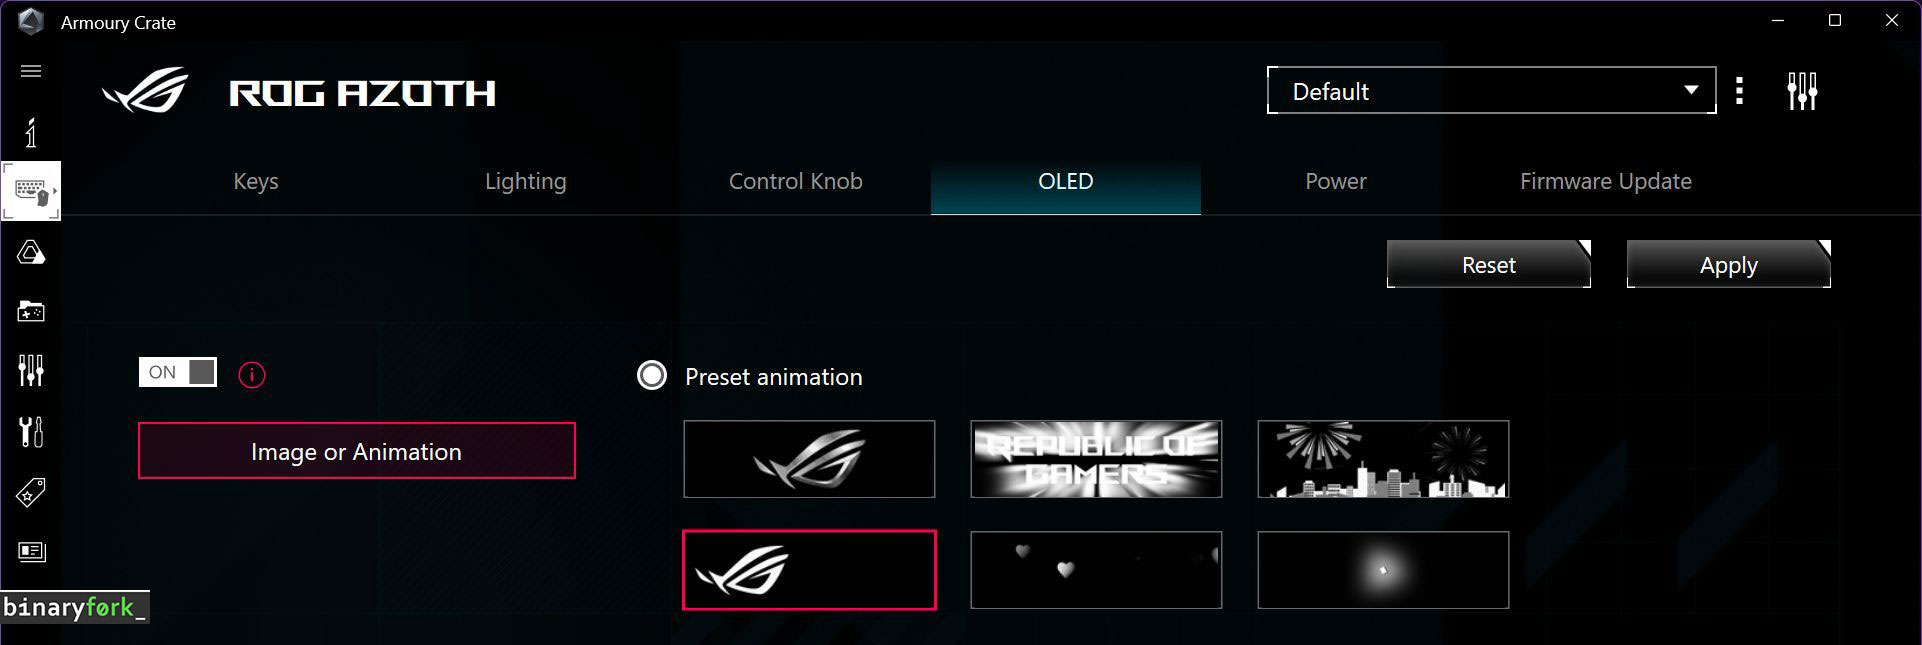 asus armoury crate rog azoth oled animation